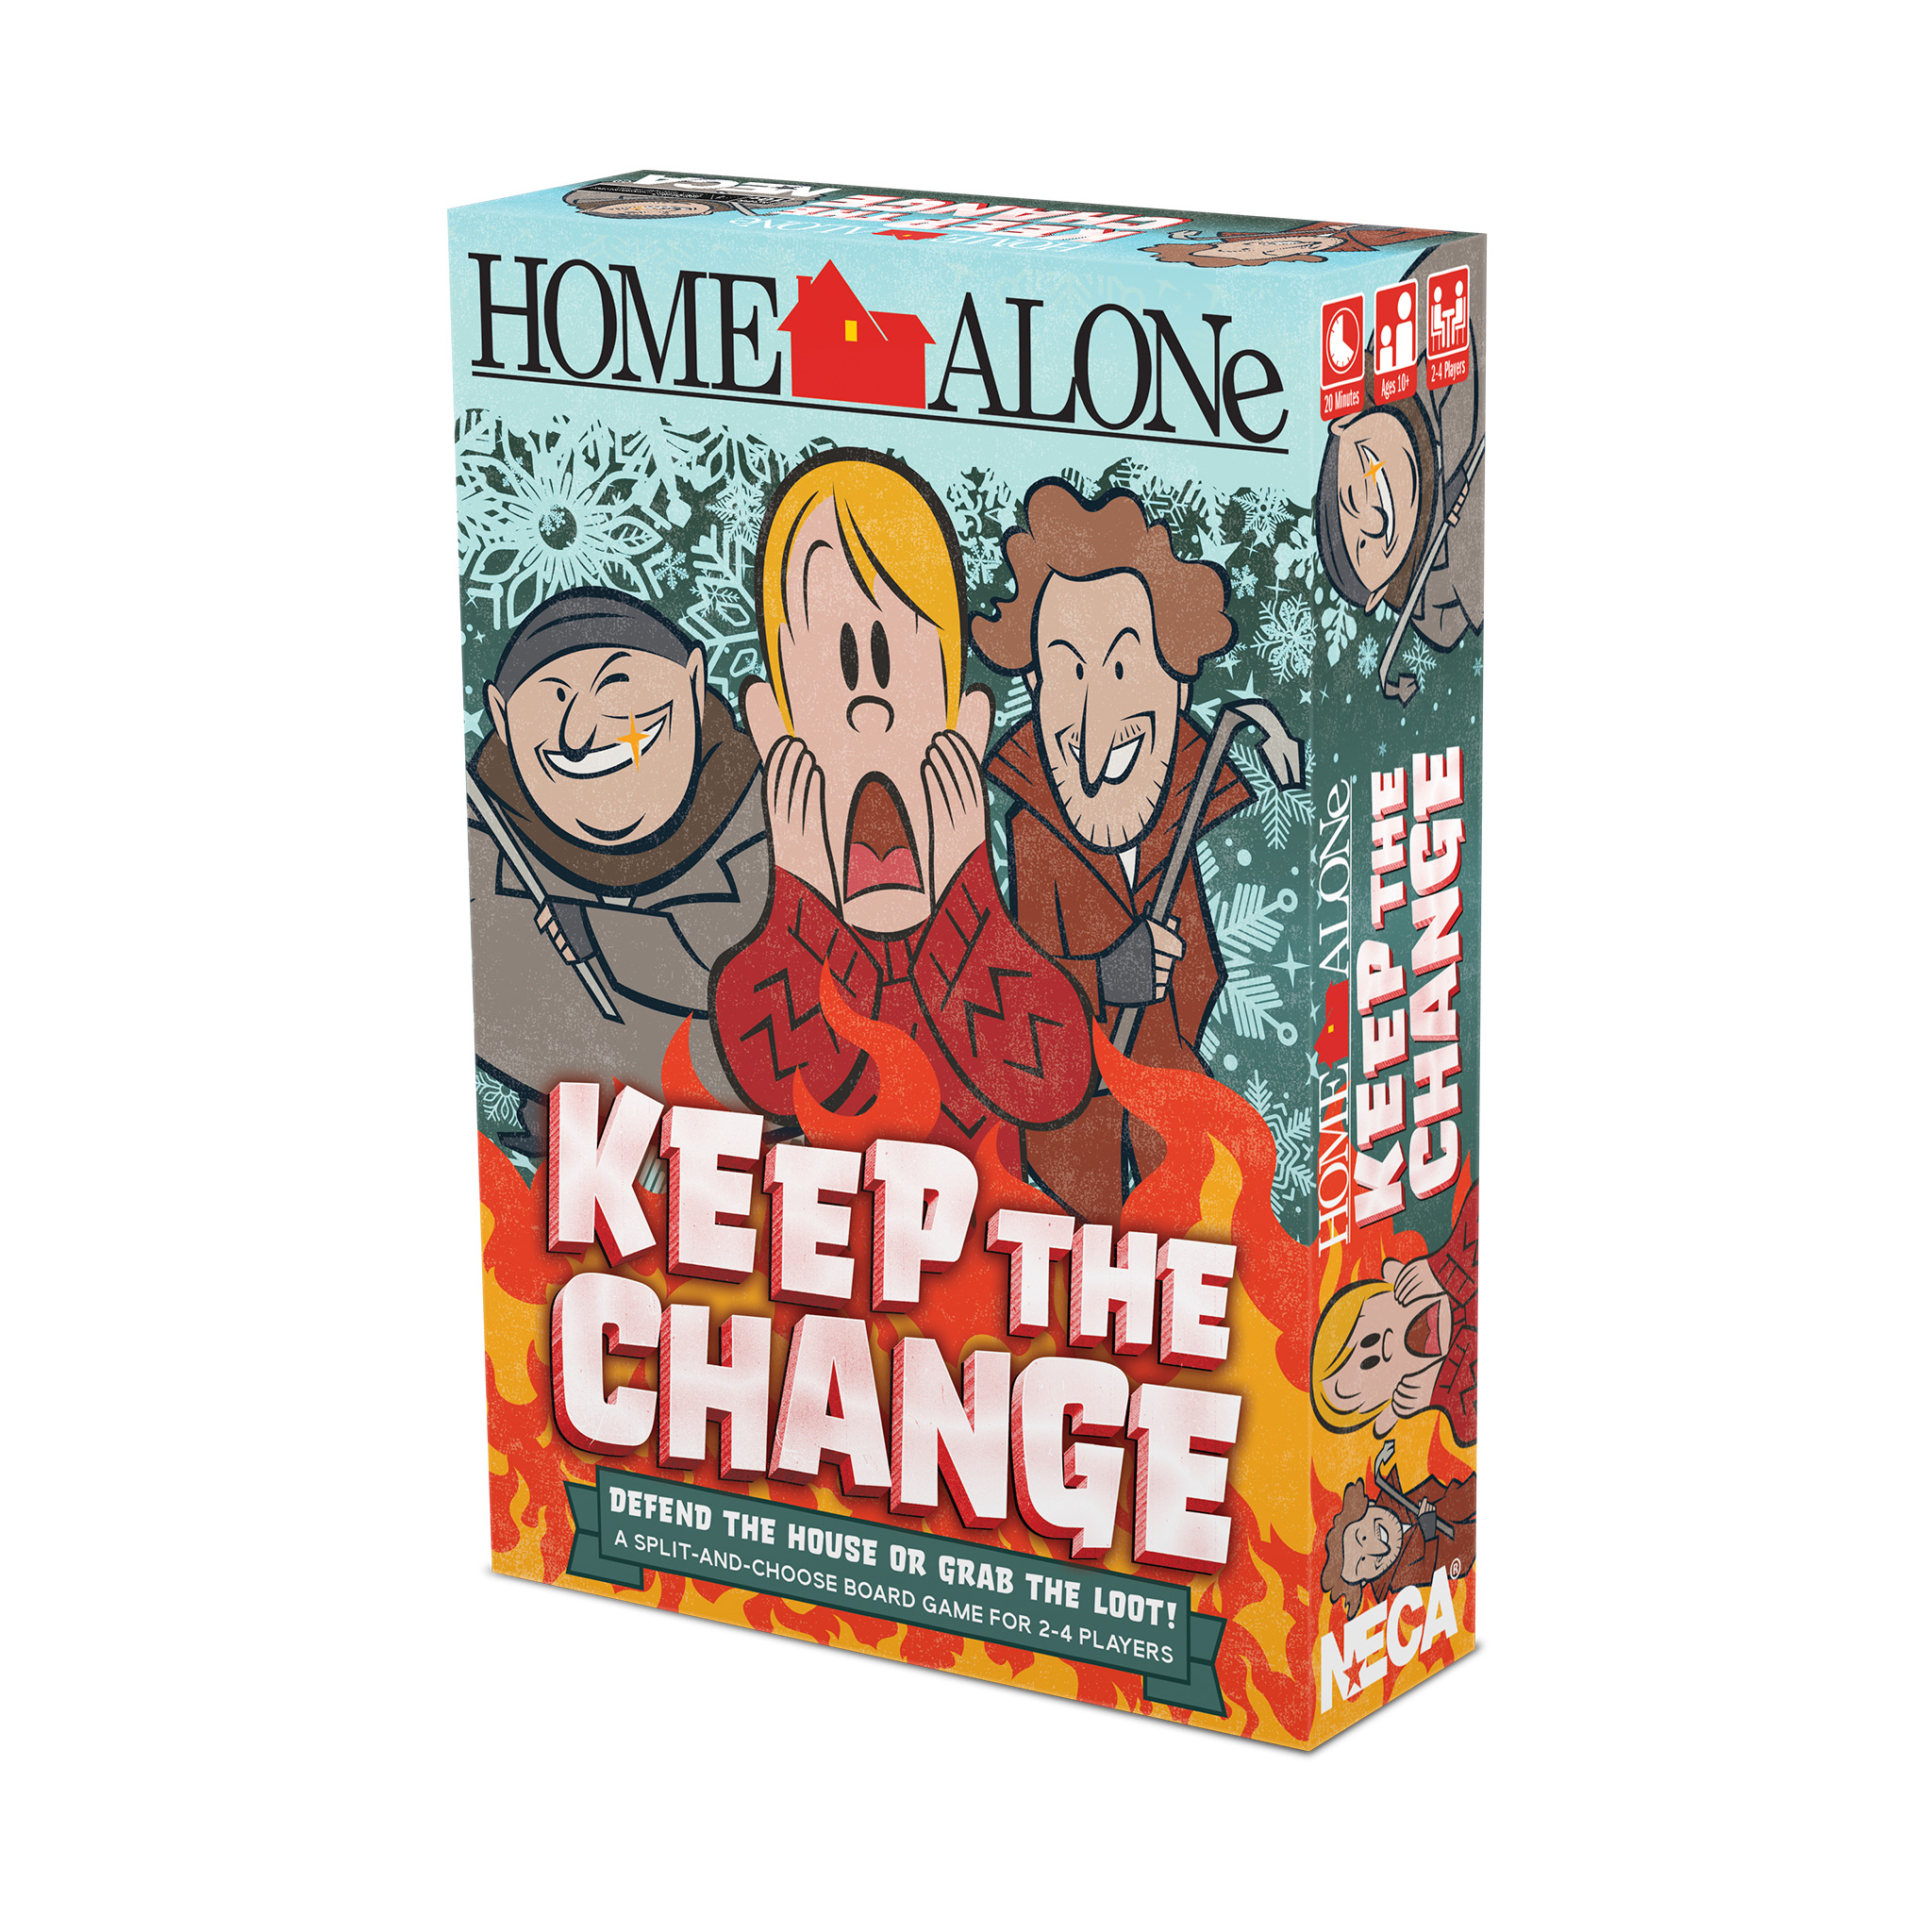 NEW RARE Neca Home Alone Keep The Change Board Game Kevin Marv Harry IN STOCK 